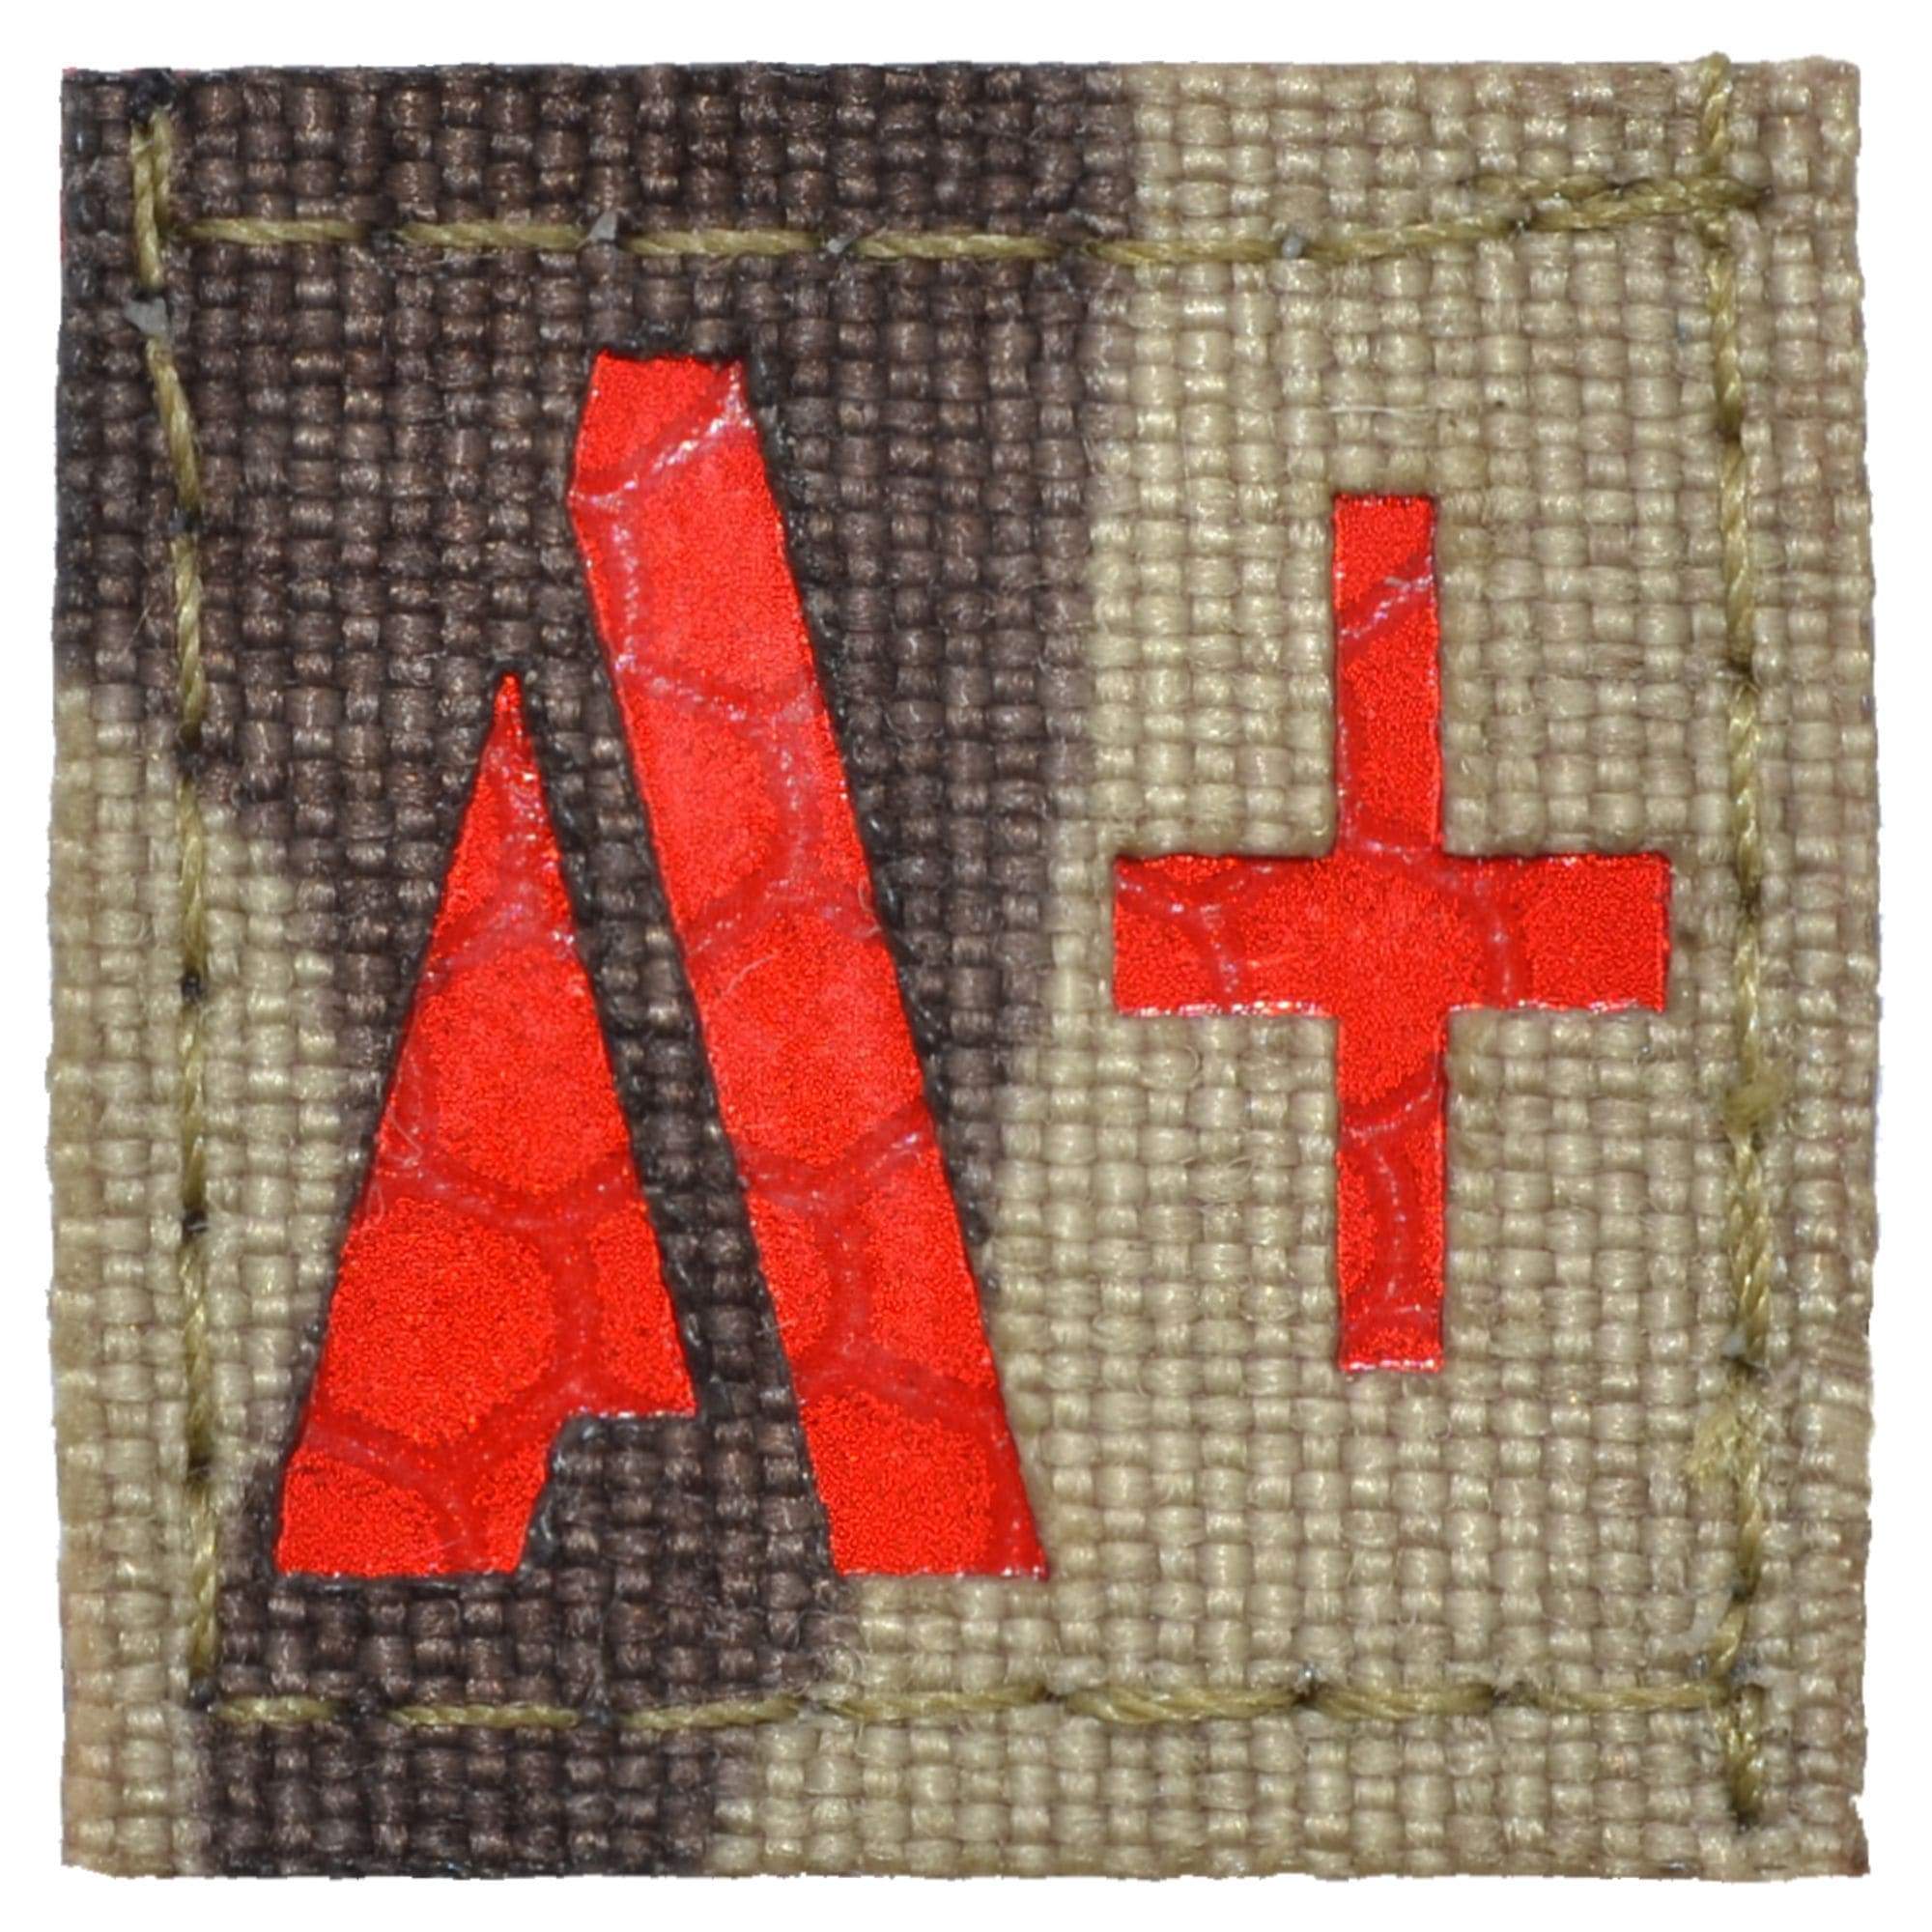 Blood Type Patch with a Red Cross